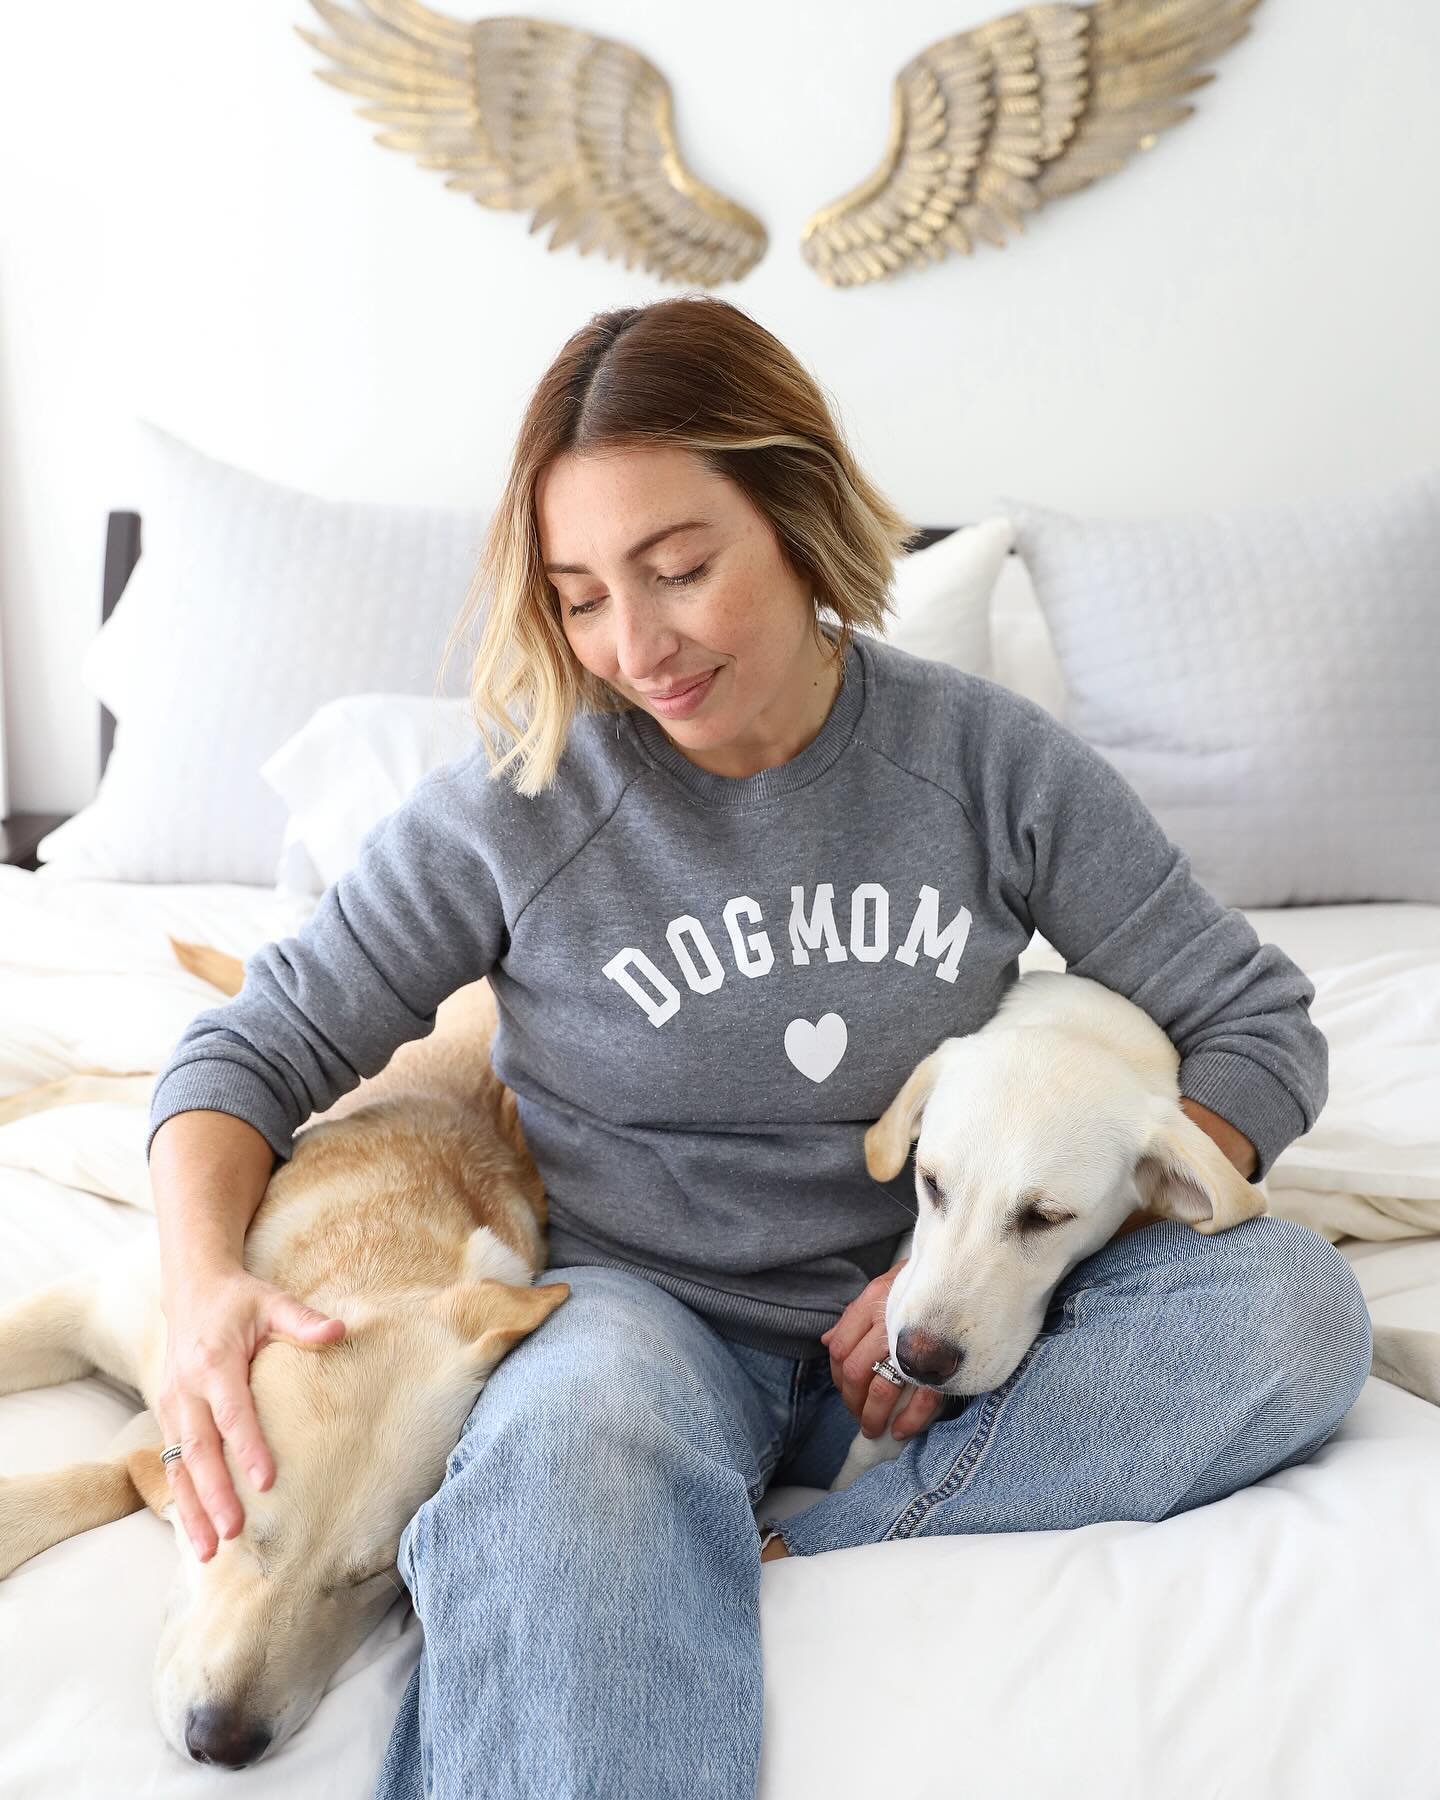 Today&rsquo;s good mood is sponsored by my dogs&hellip;🐶🐶

My newsletter, The Fix, drops today and I&rsquo;m sharing a very personal and vulnerable story about what motherhood looks like for me.✨

I don&rsquo;t usually talk about my personal life t